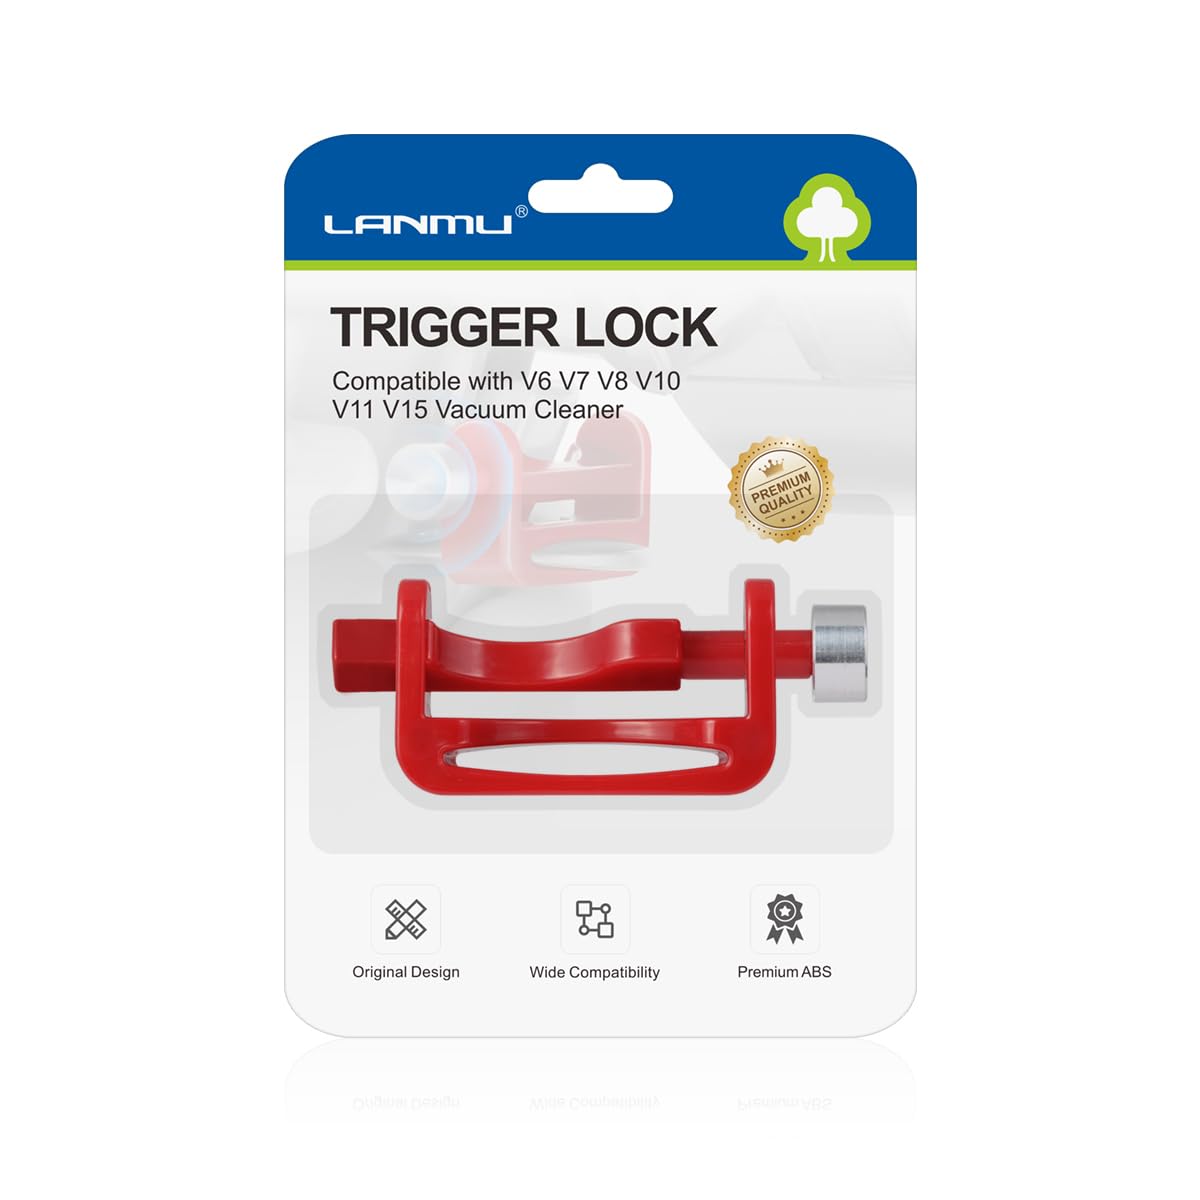 LANMU Trigger Lock Compatible with Dyson